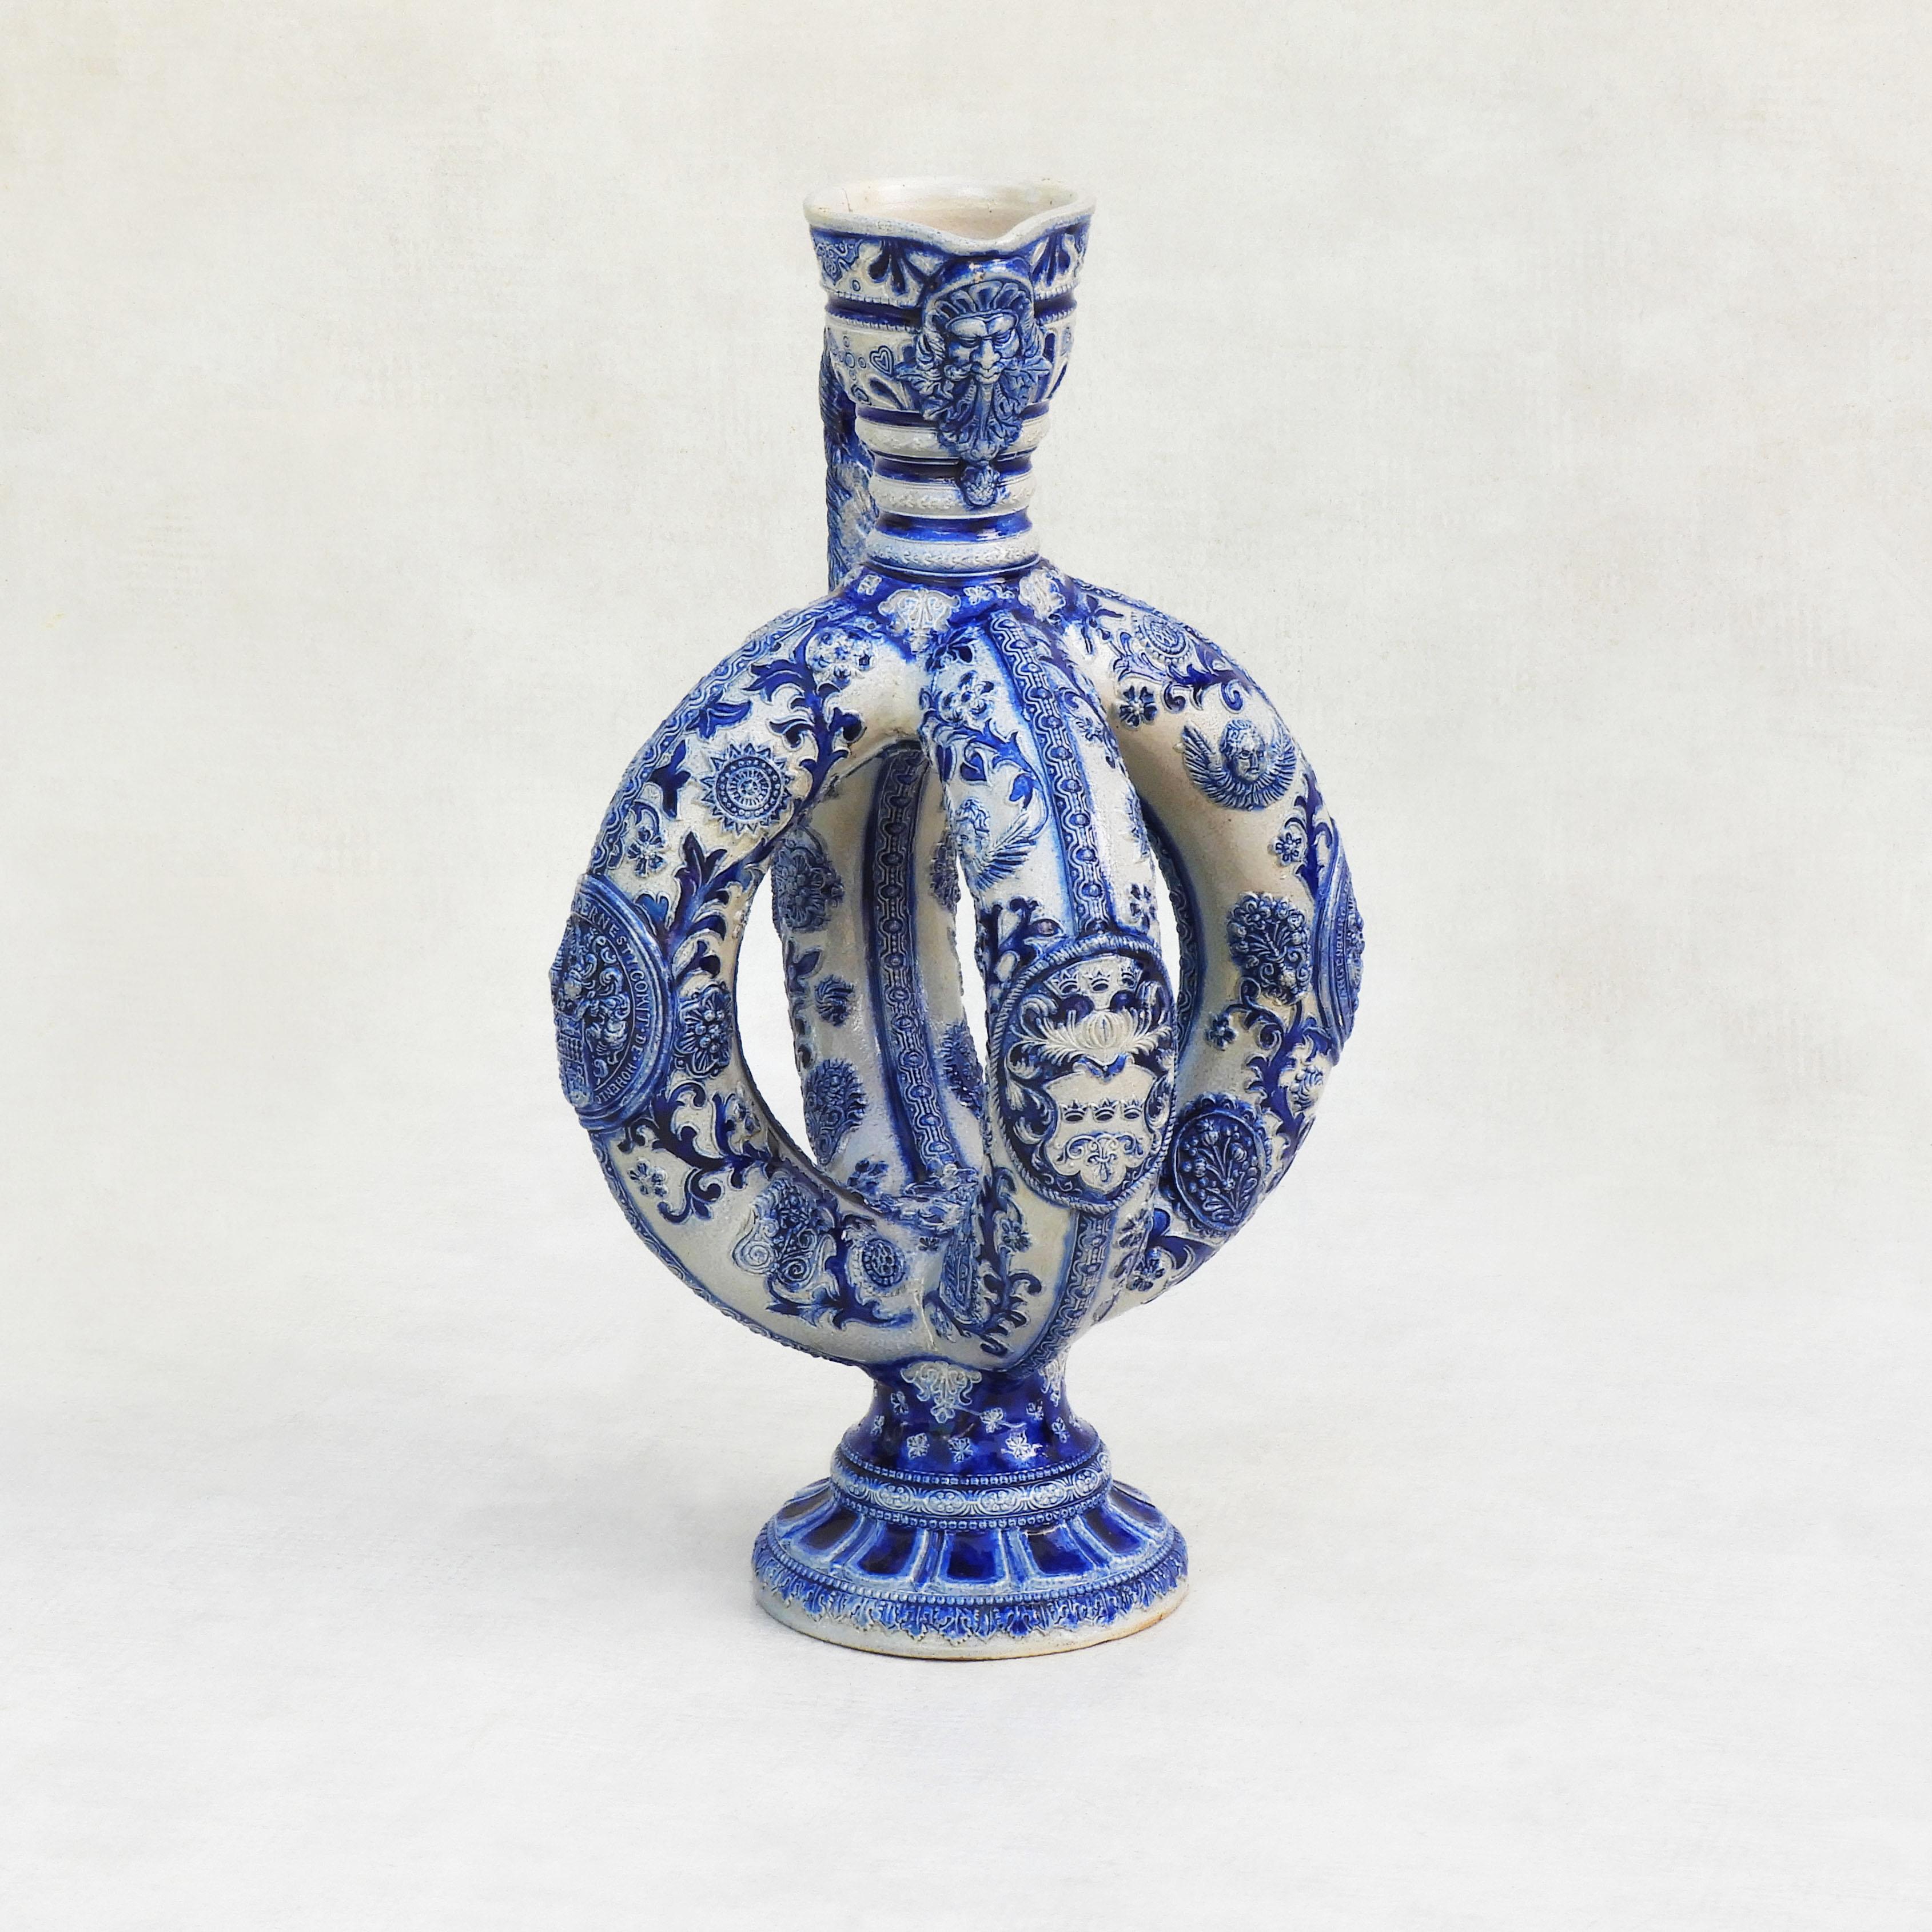 Antique Westerwald stoneware Ewer C1900

A rare German Westerwald salt glazed pottery ewer c1900.
An elaborately decorated stoneware jug with a tall ribbed neck and two intersecting double rings, beautifully embellished in deep cobalt blue with